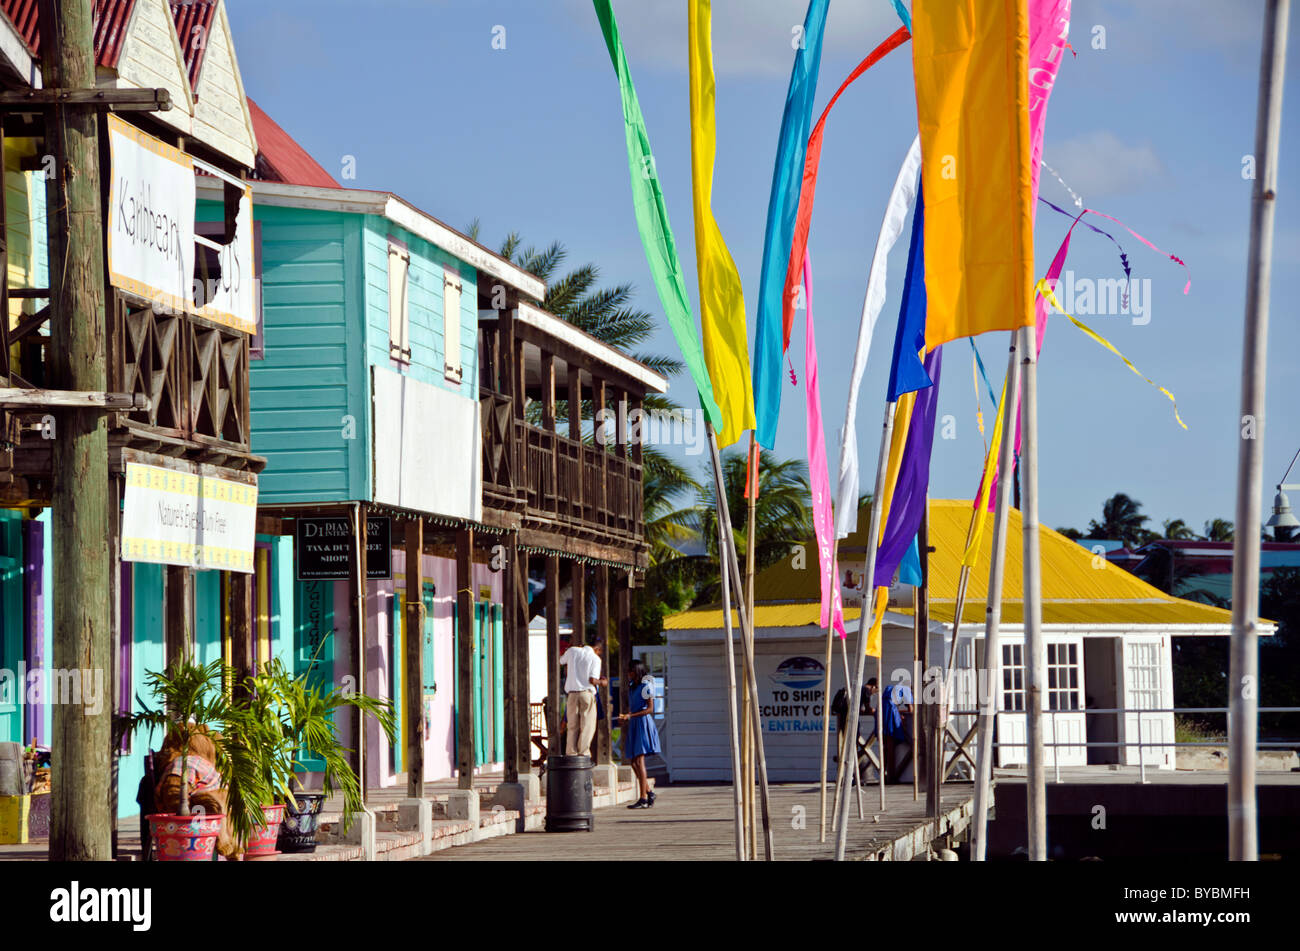 Redcliffe Quay shopping area, Antigua with bright colors Stock Photo